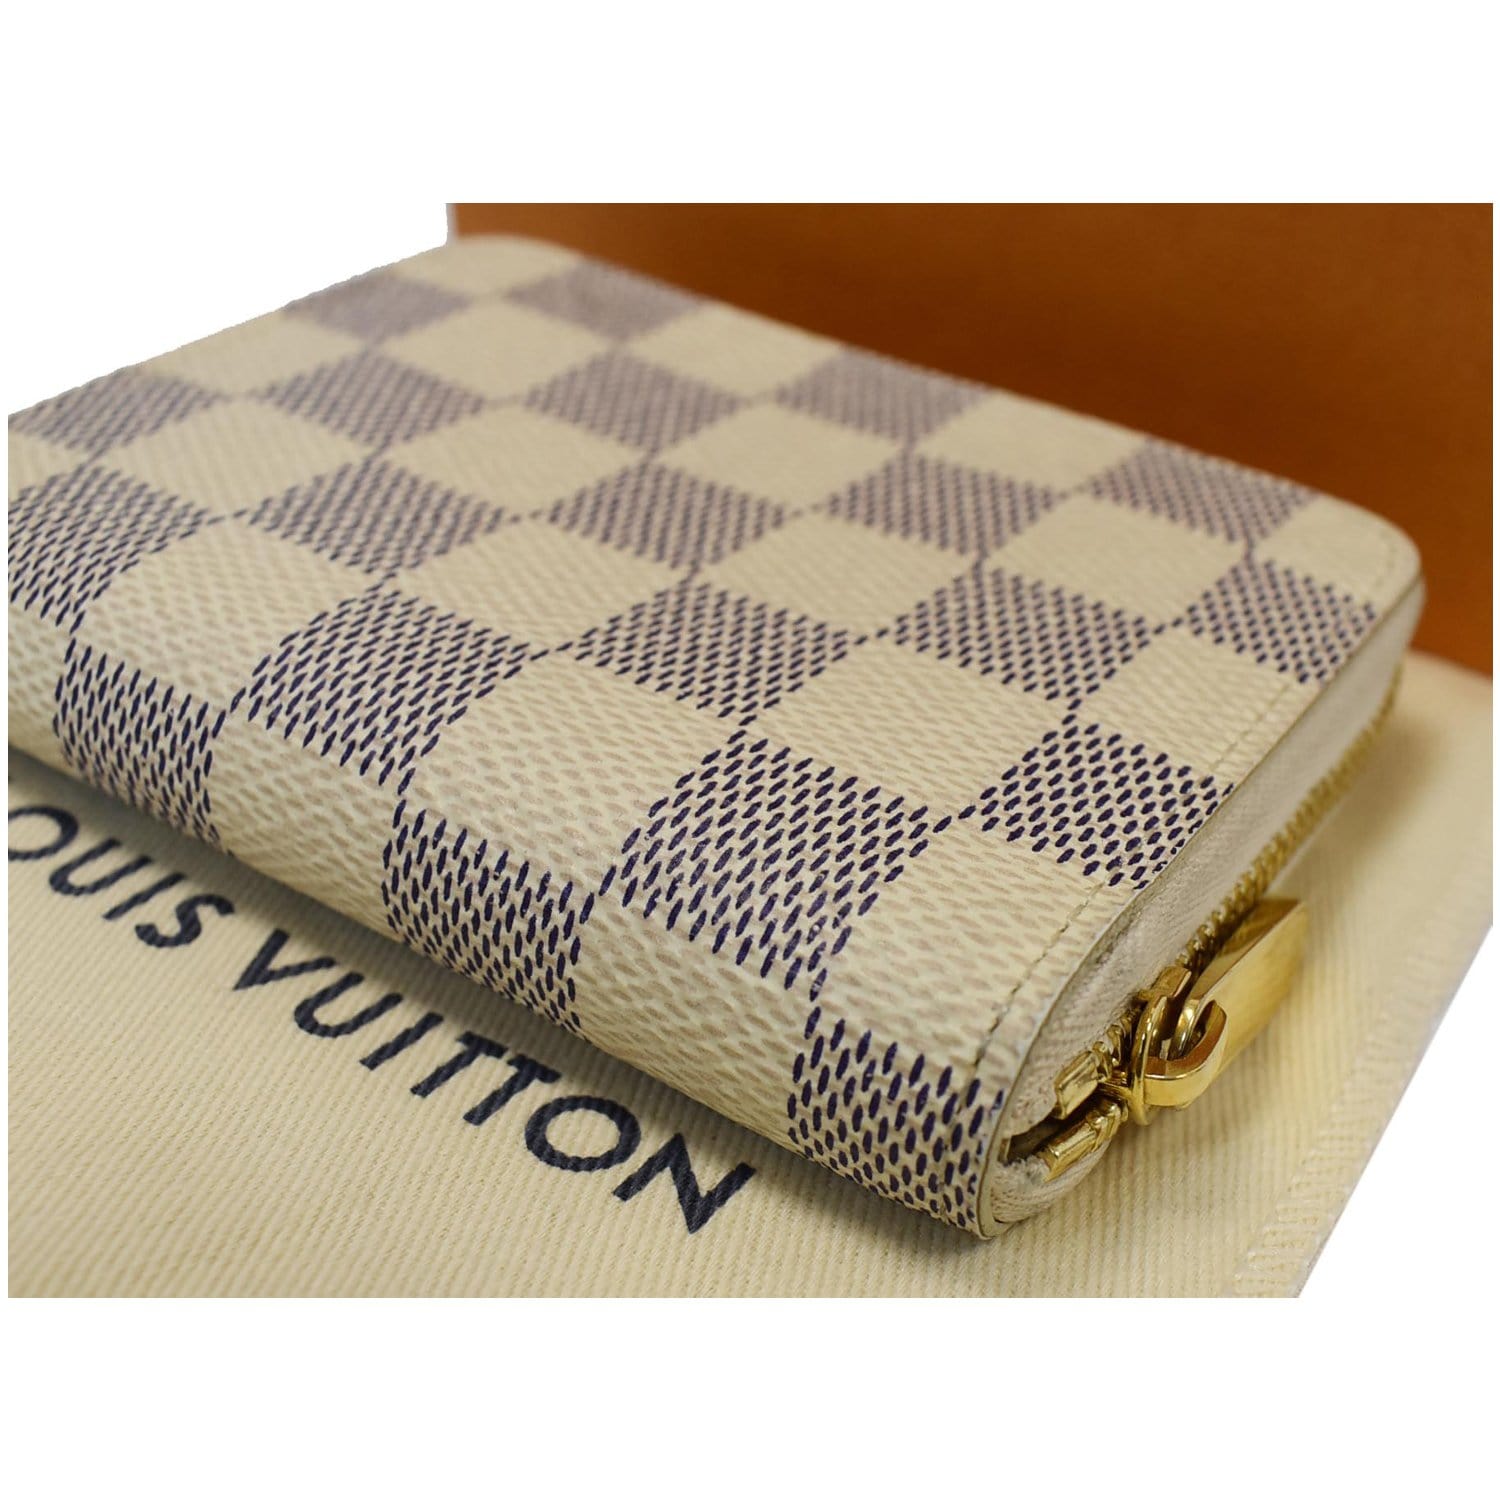 Buy [Used] LOUIS VUITTON Zippy coin purse Damier Azur N63069 from Japan -  Buy authentic Plus exclusive items from Japan